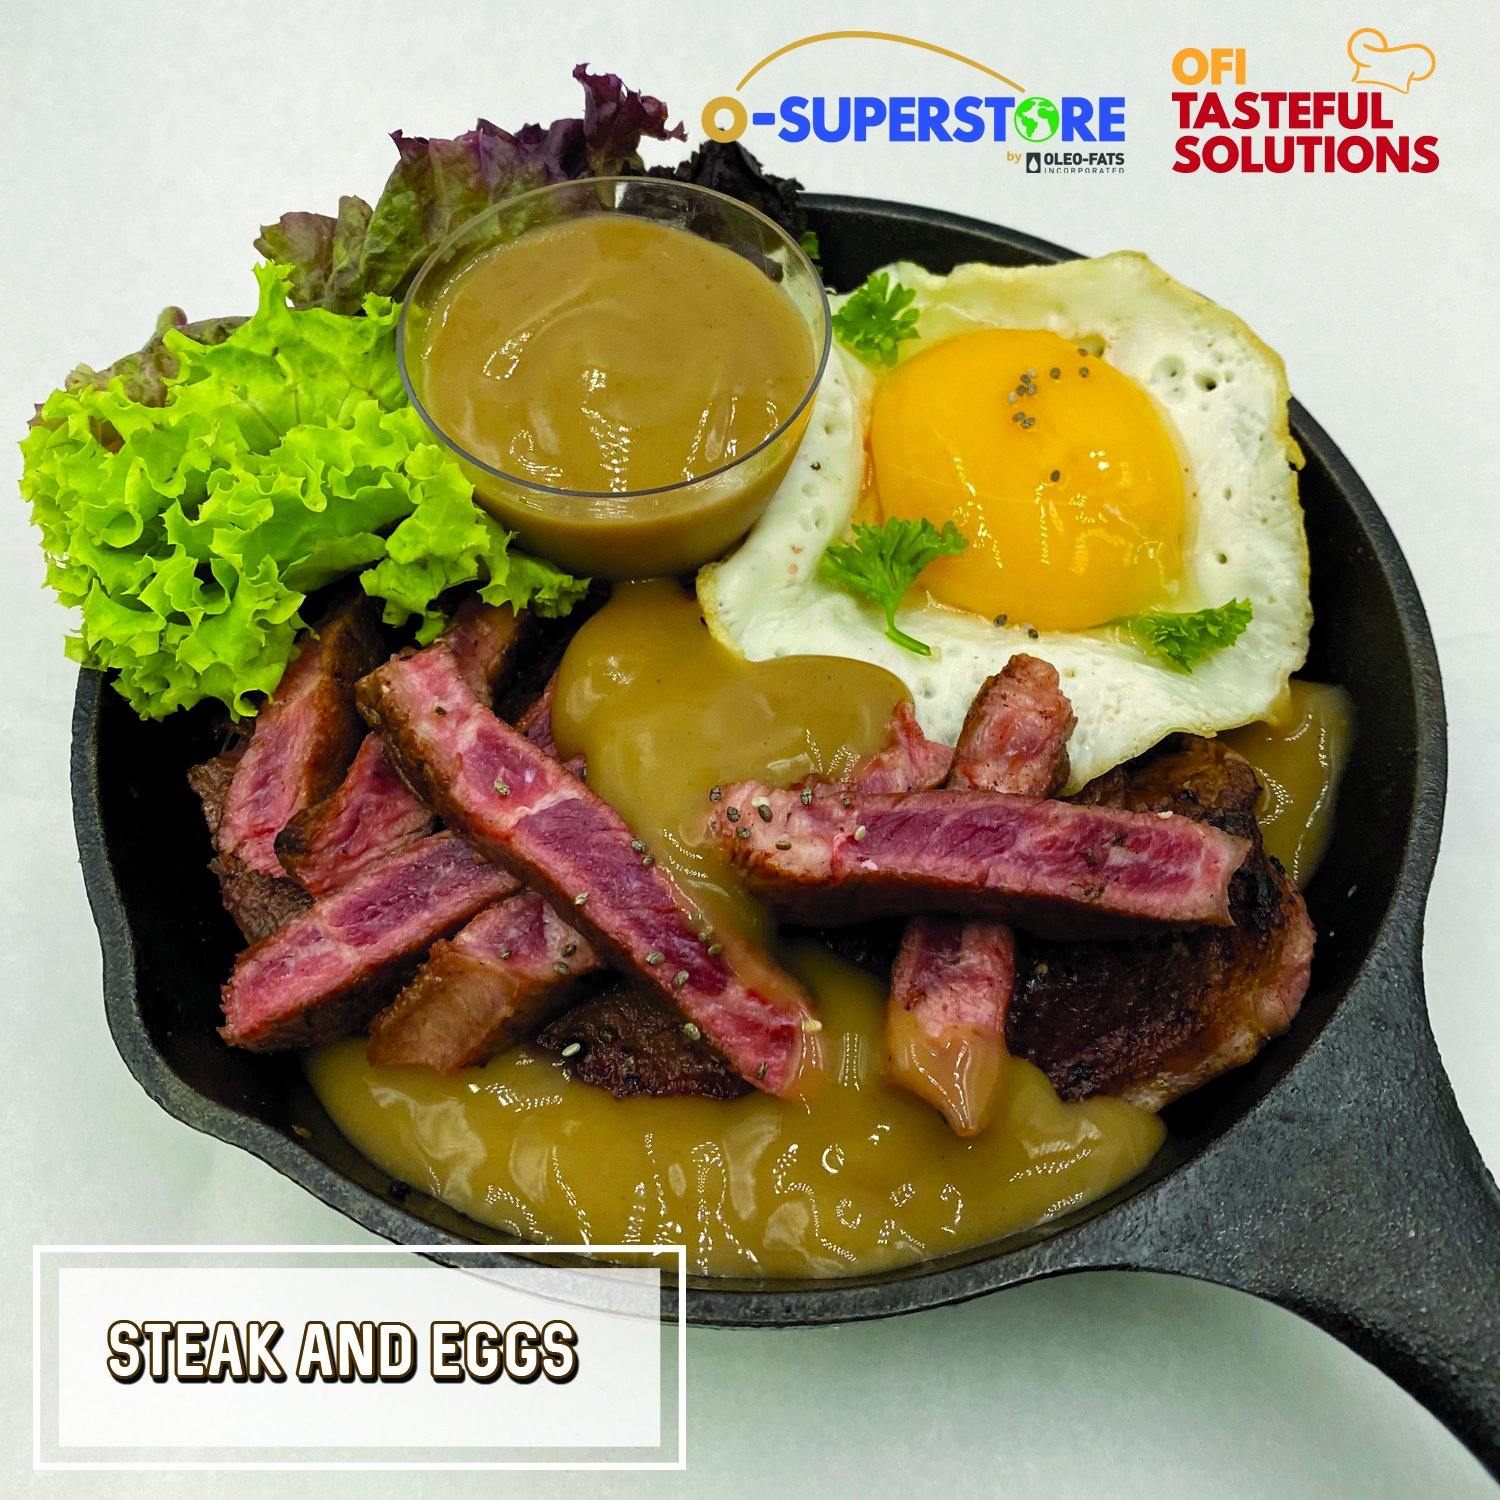 Steak and Eggs - O-SUPERSTORE